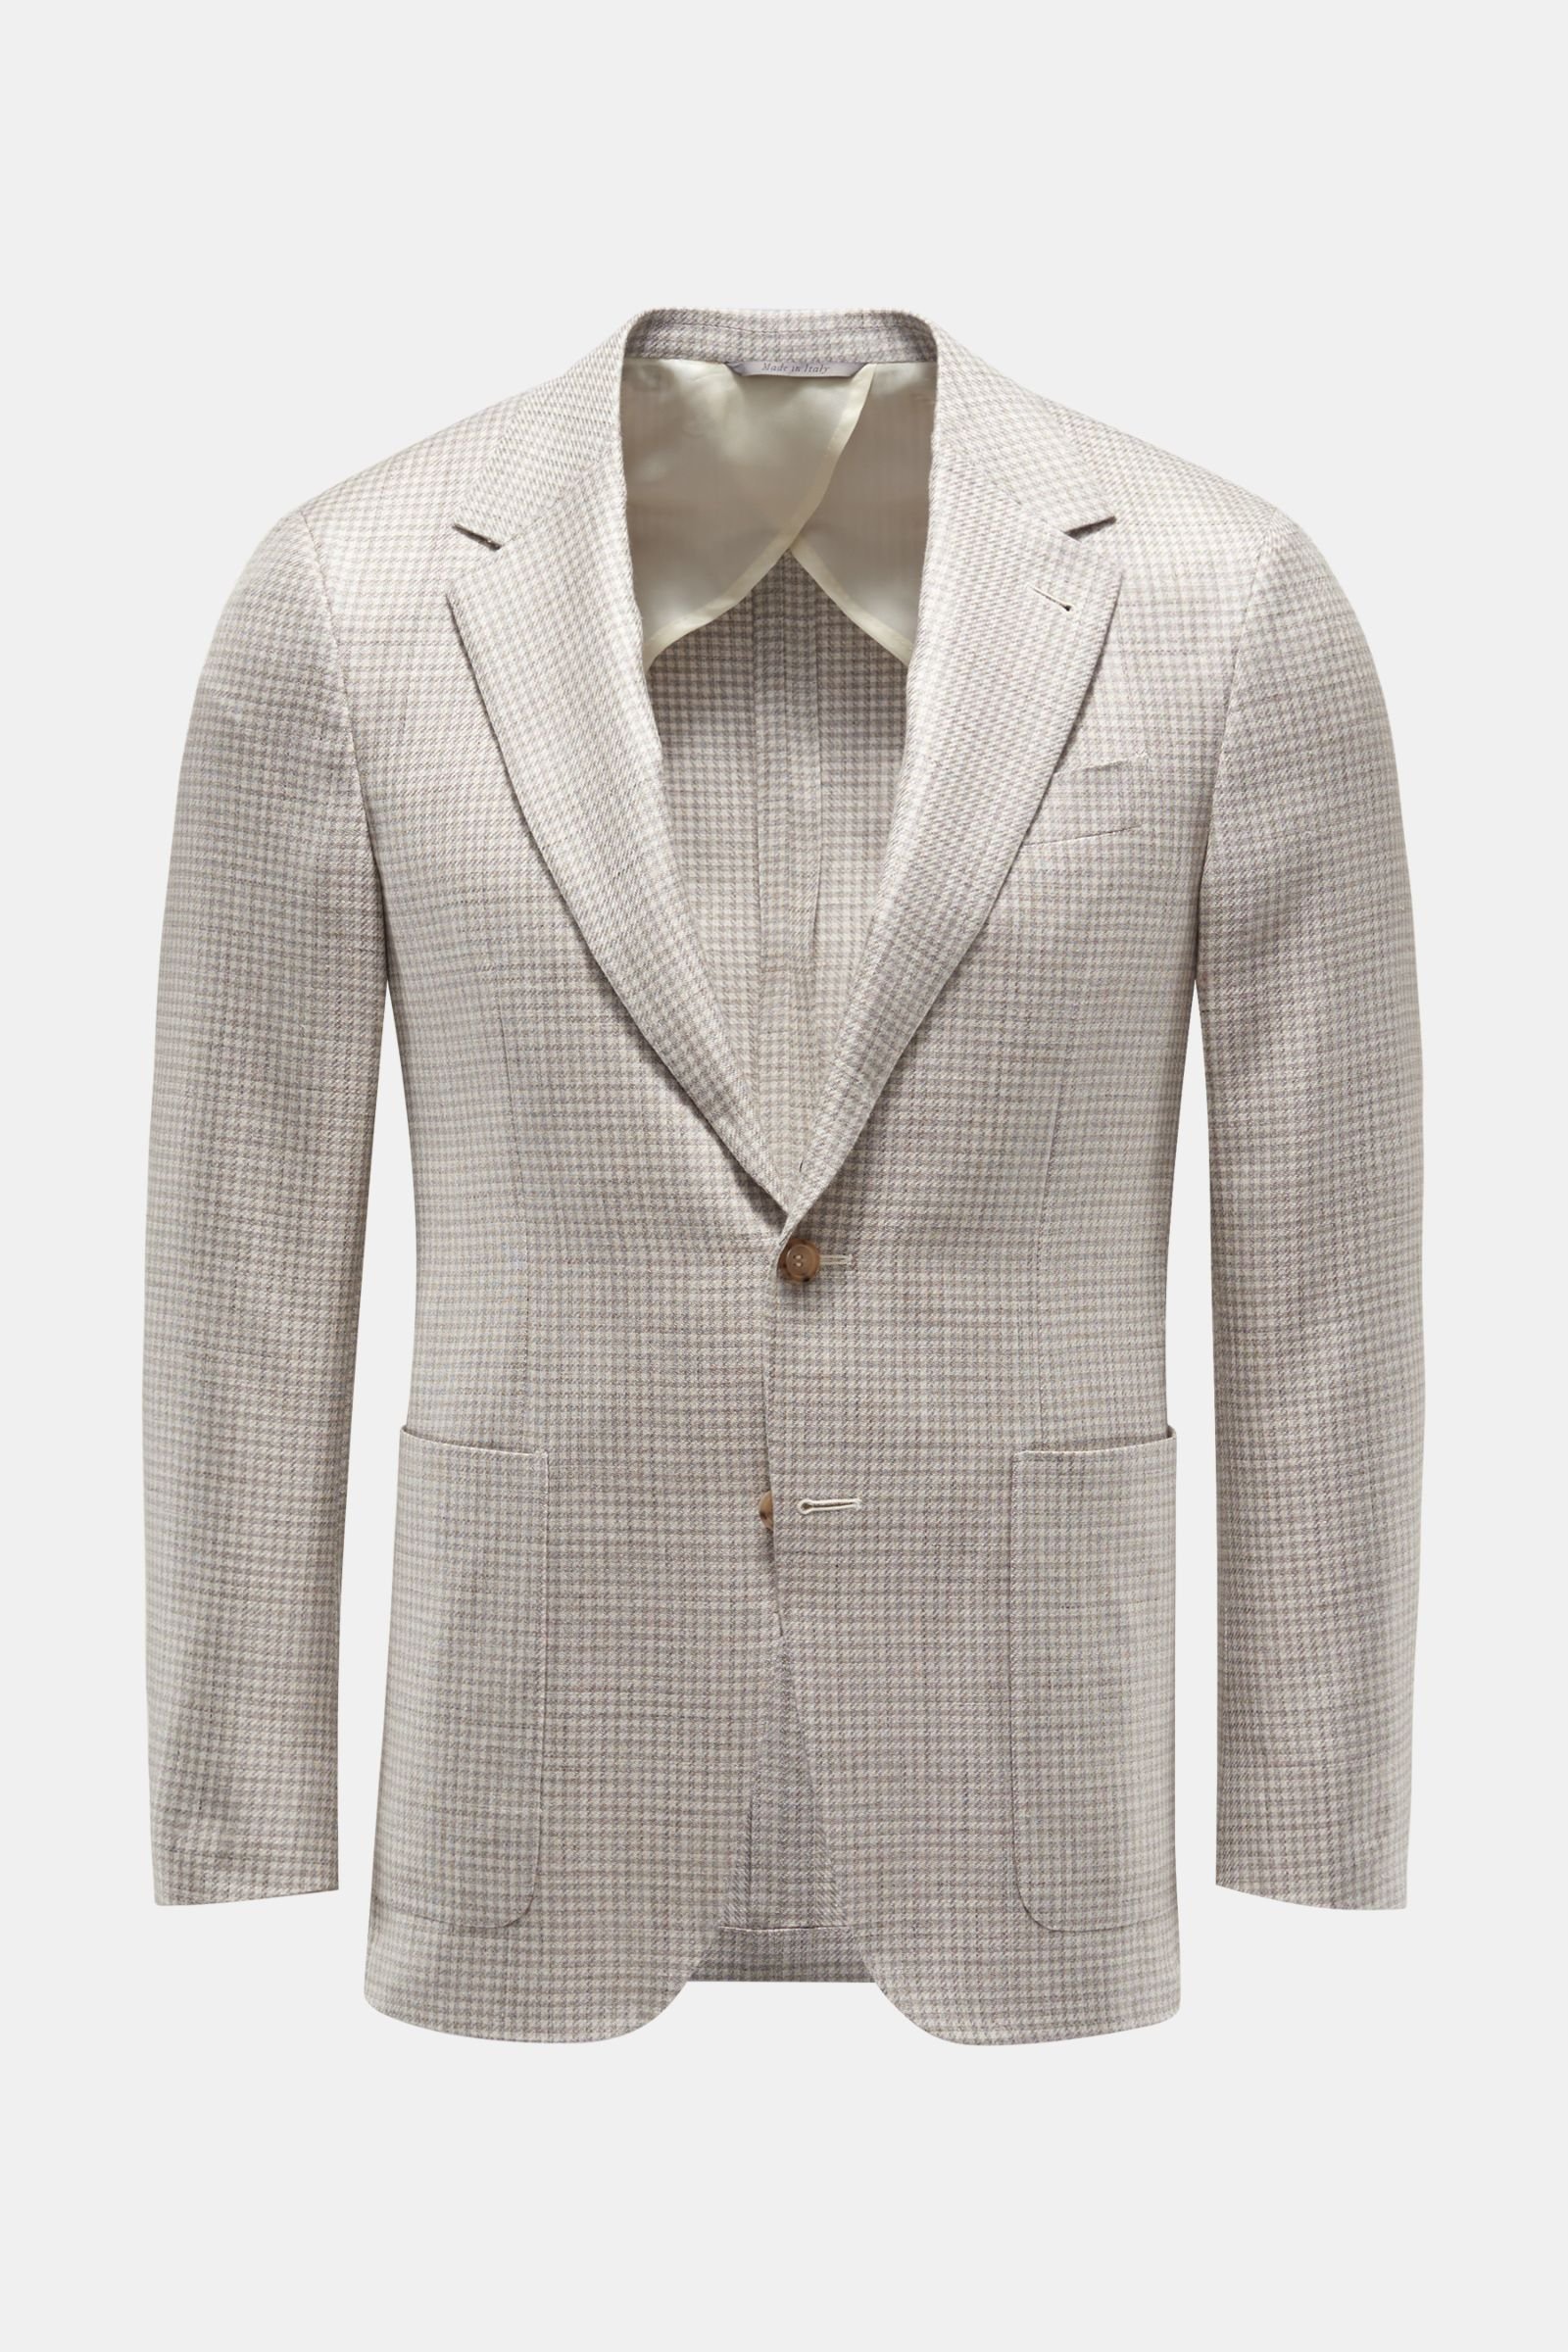 Smart-casual jacket beige/grey checked